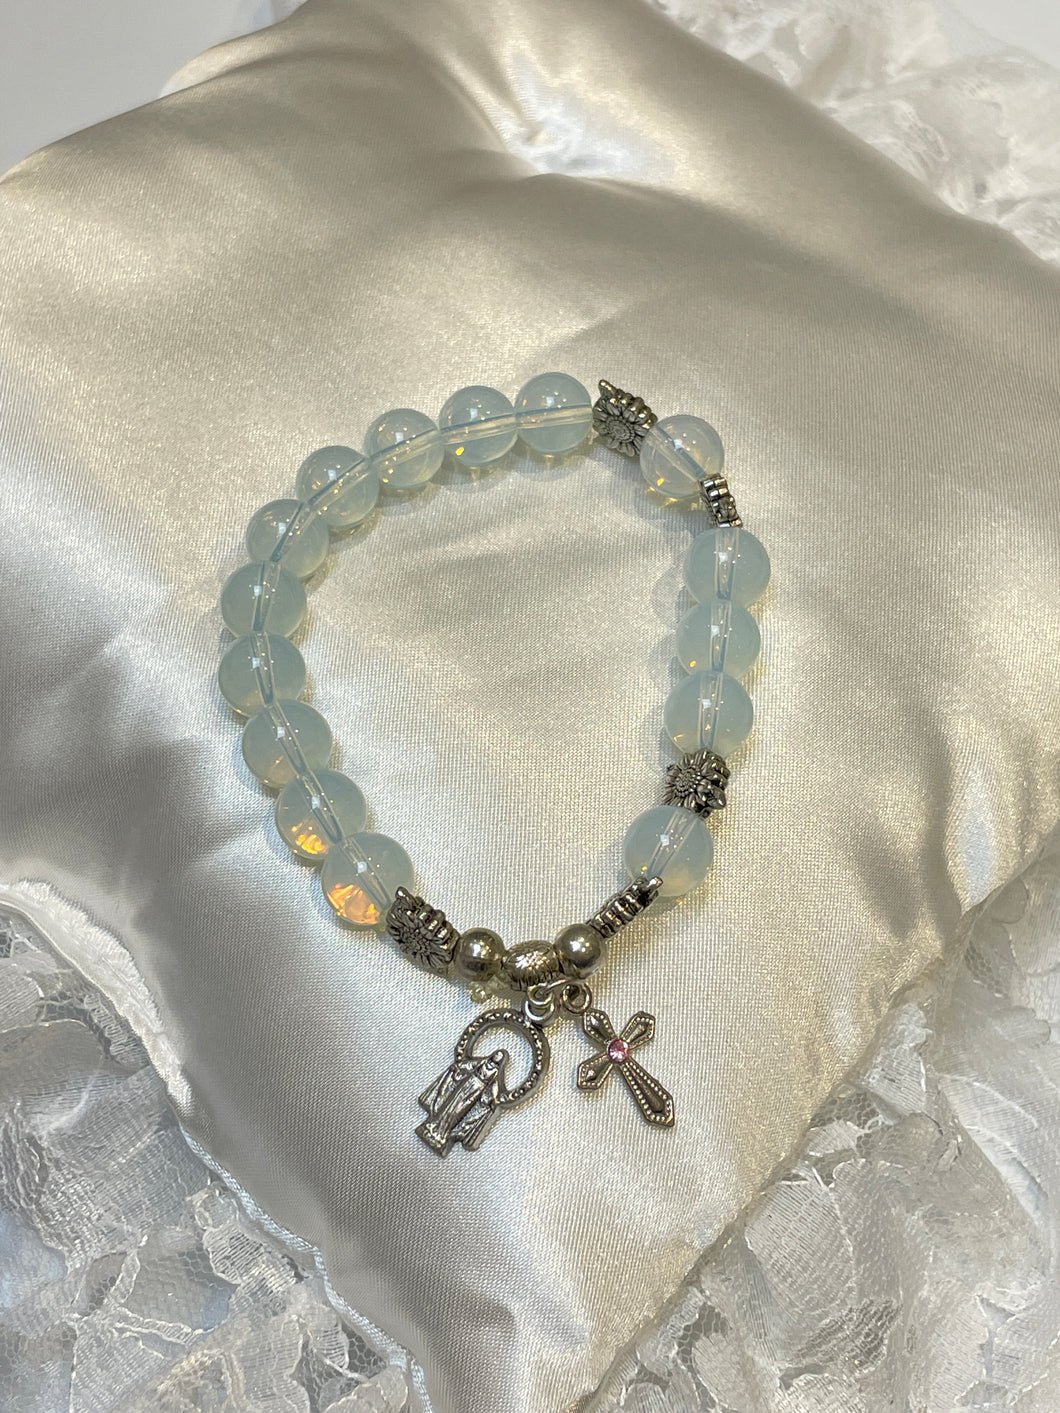 Translucent Blue Gemstone Rosary Bracelet with Our Lady of Grace and Crucifix Charms